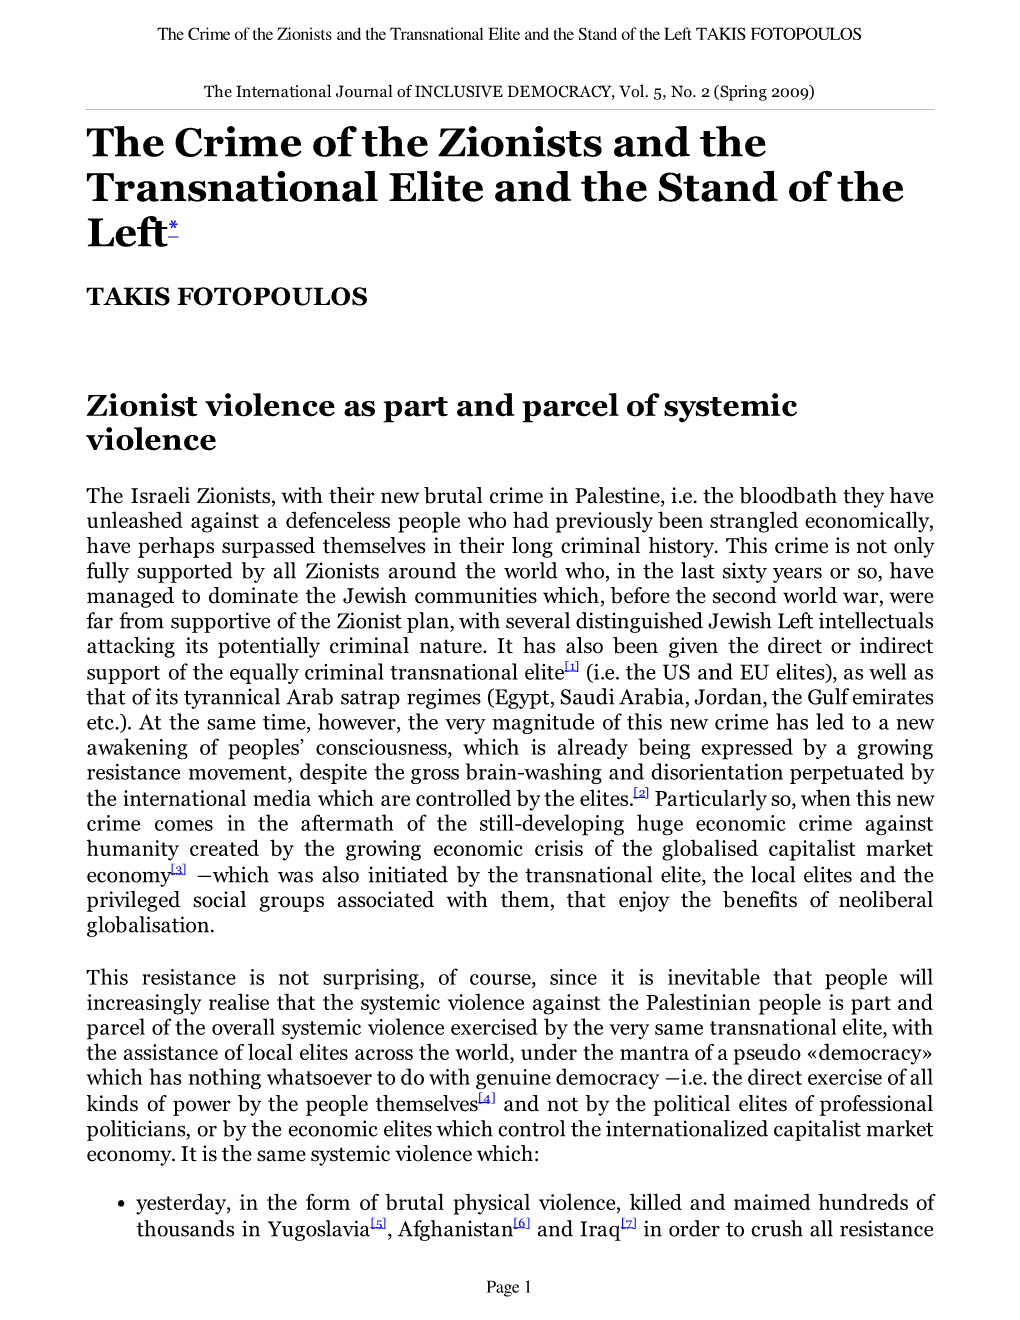 The Crime of the Zionists and the Transnational Elite and the Stand of the Left TAKIS FOTOPOULOS